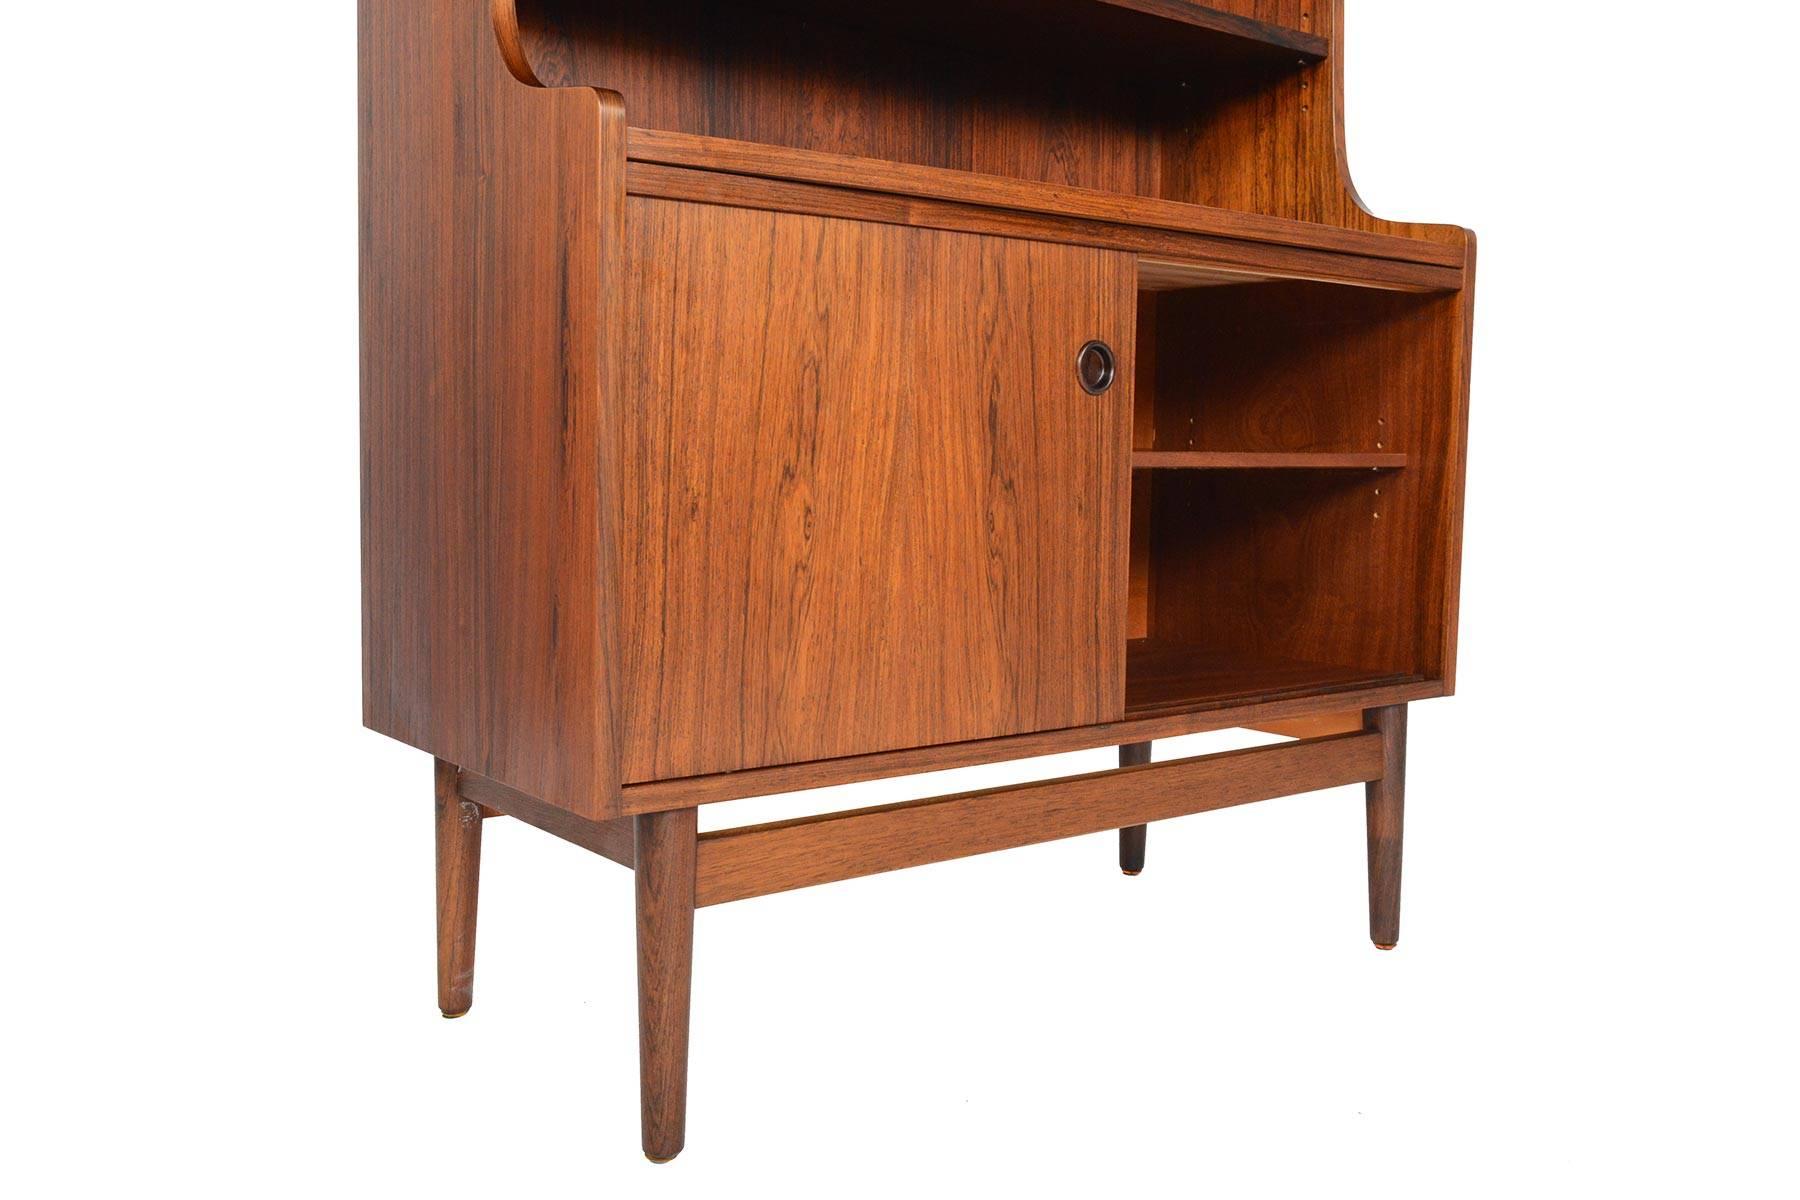 20th Century Danish Modern Midcentury Bookcase in Rosewood by Johannes Sorth #3